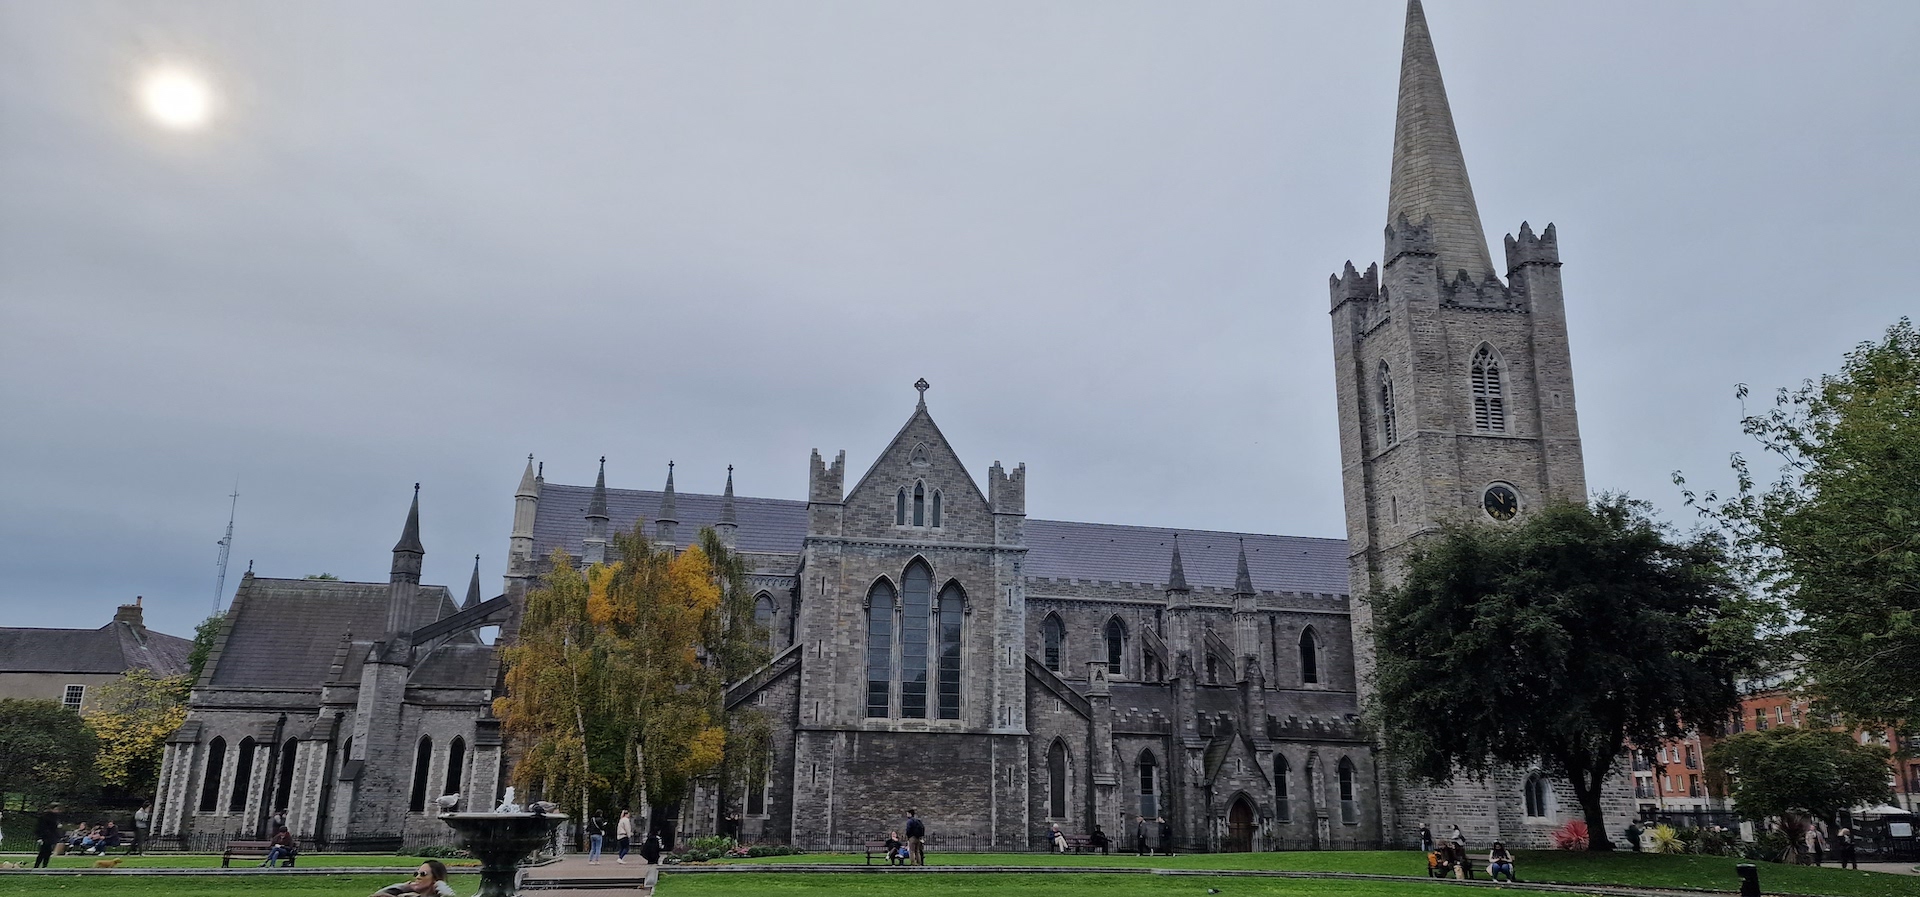 Discovering the Beauty and Significance of St. Patrick’s Cathedral through Guided Tours